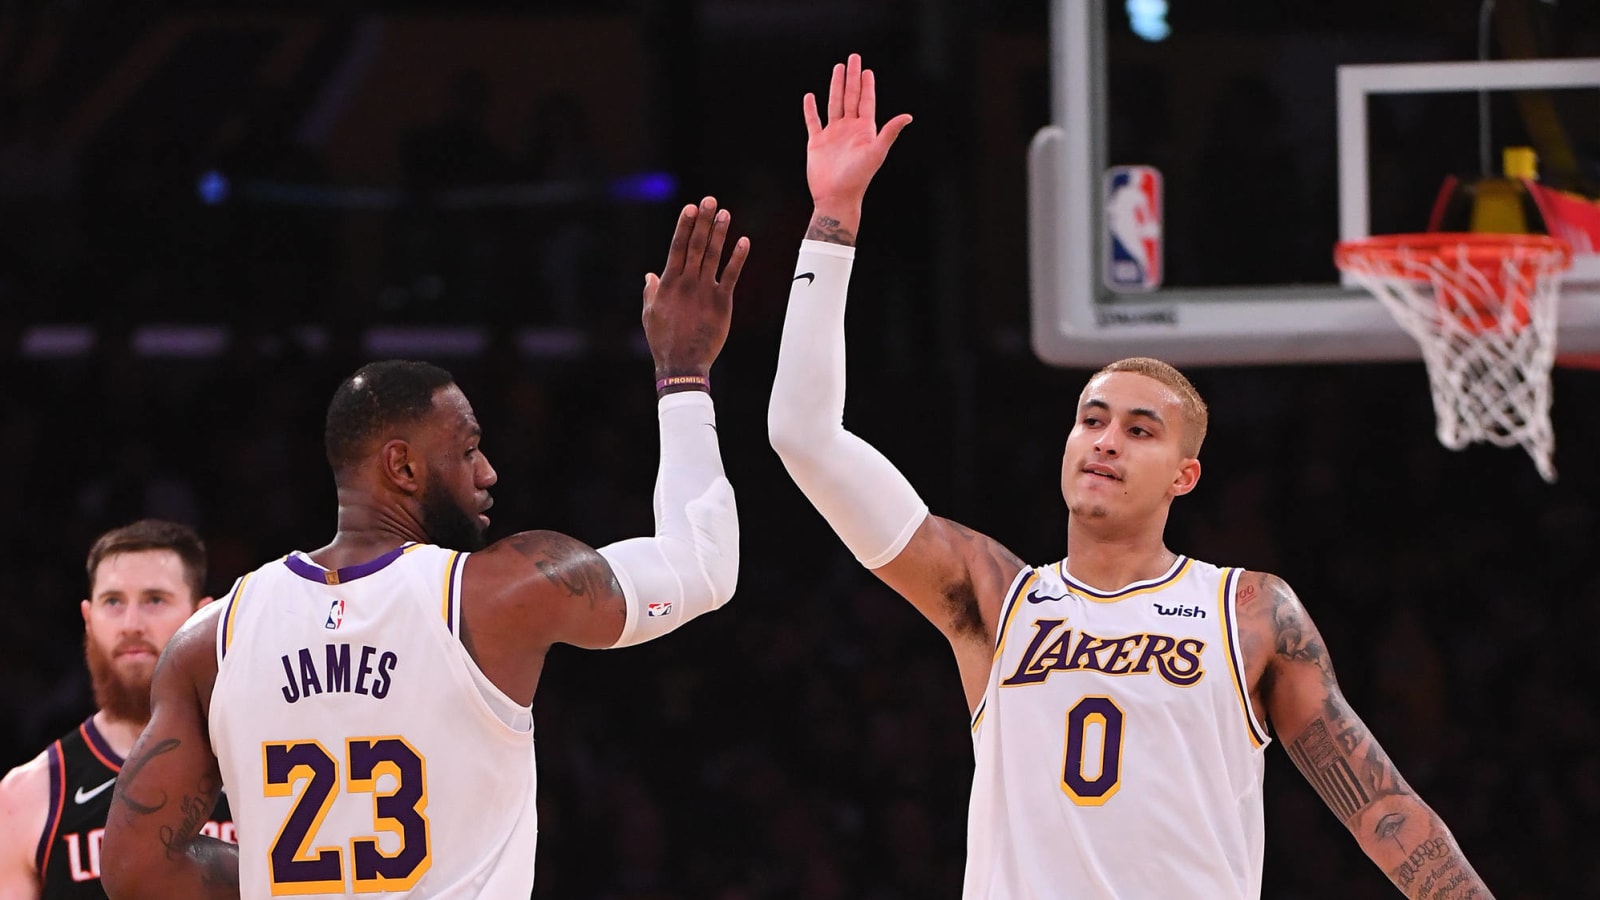 Kyle Kuzma puts crown on LeBron after win over Clippers